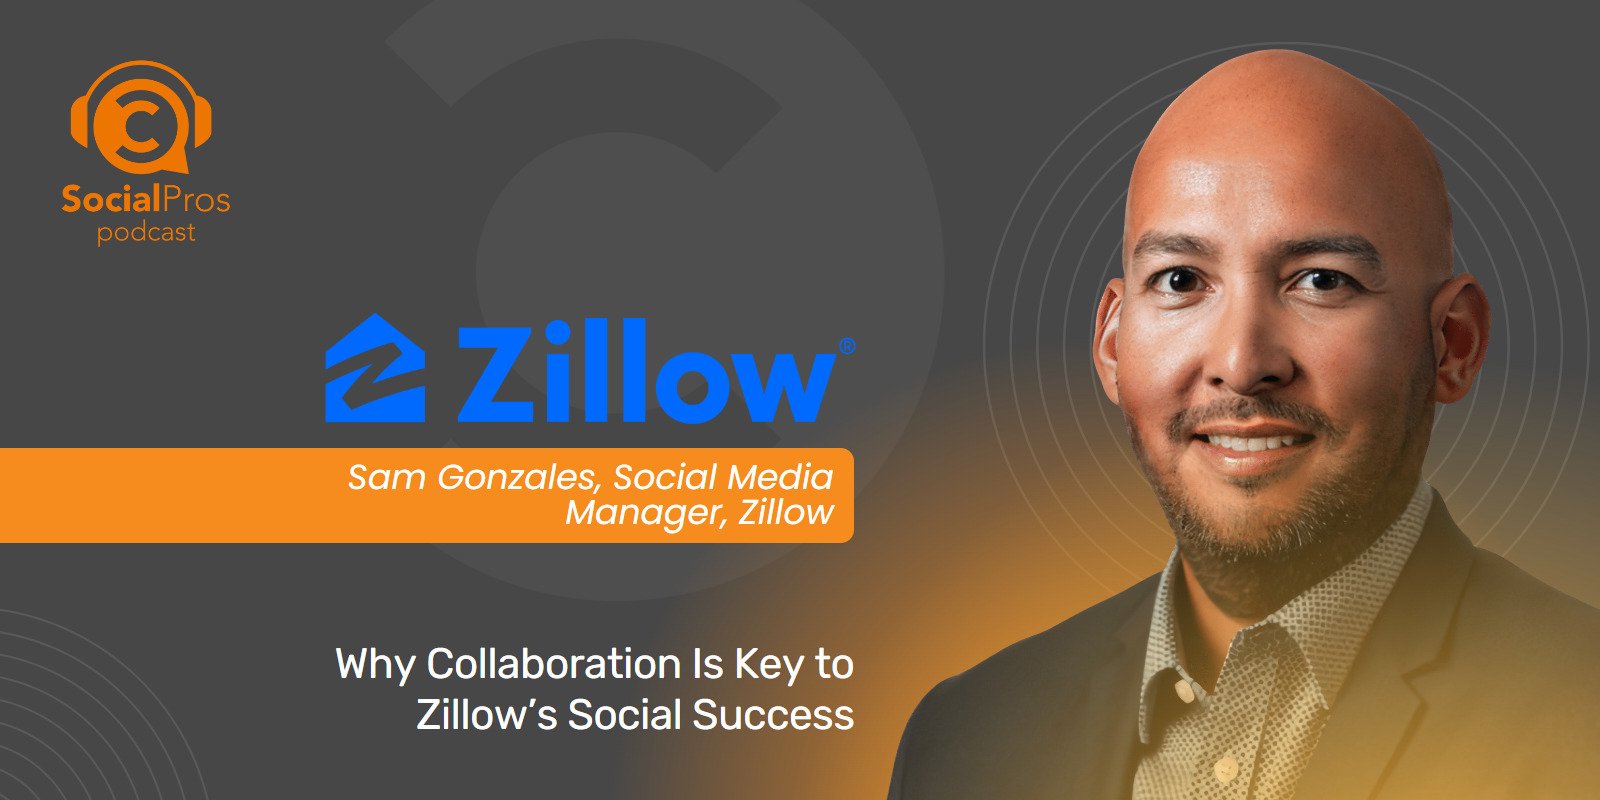 Why Collaboration Is Key to Zillow’s Social Success